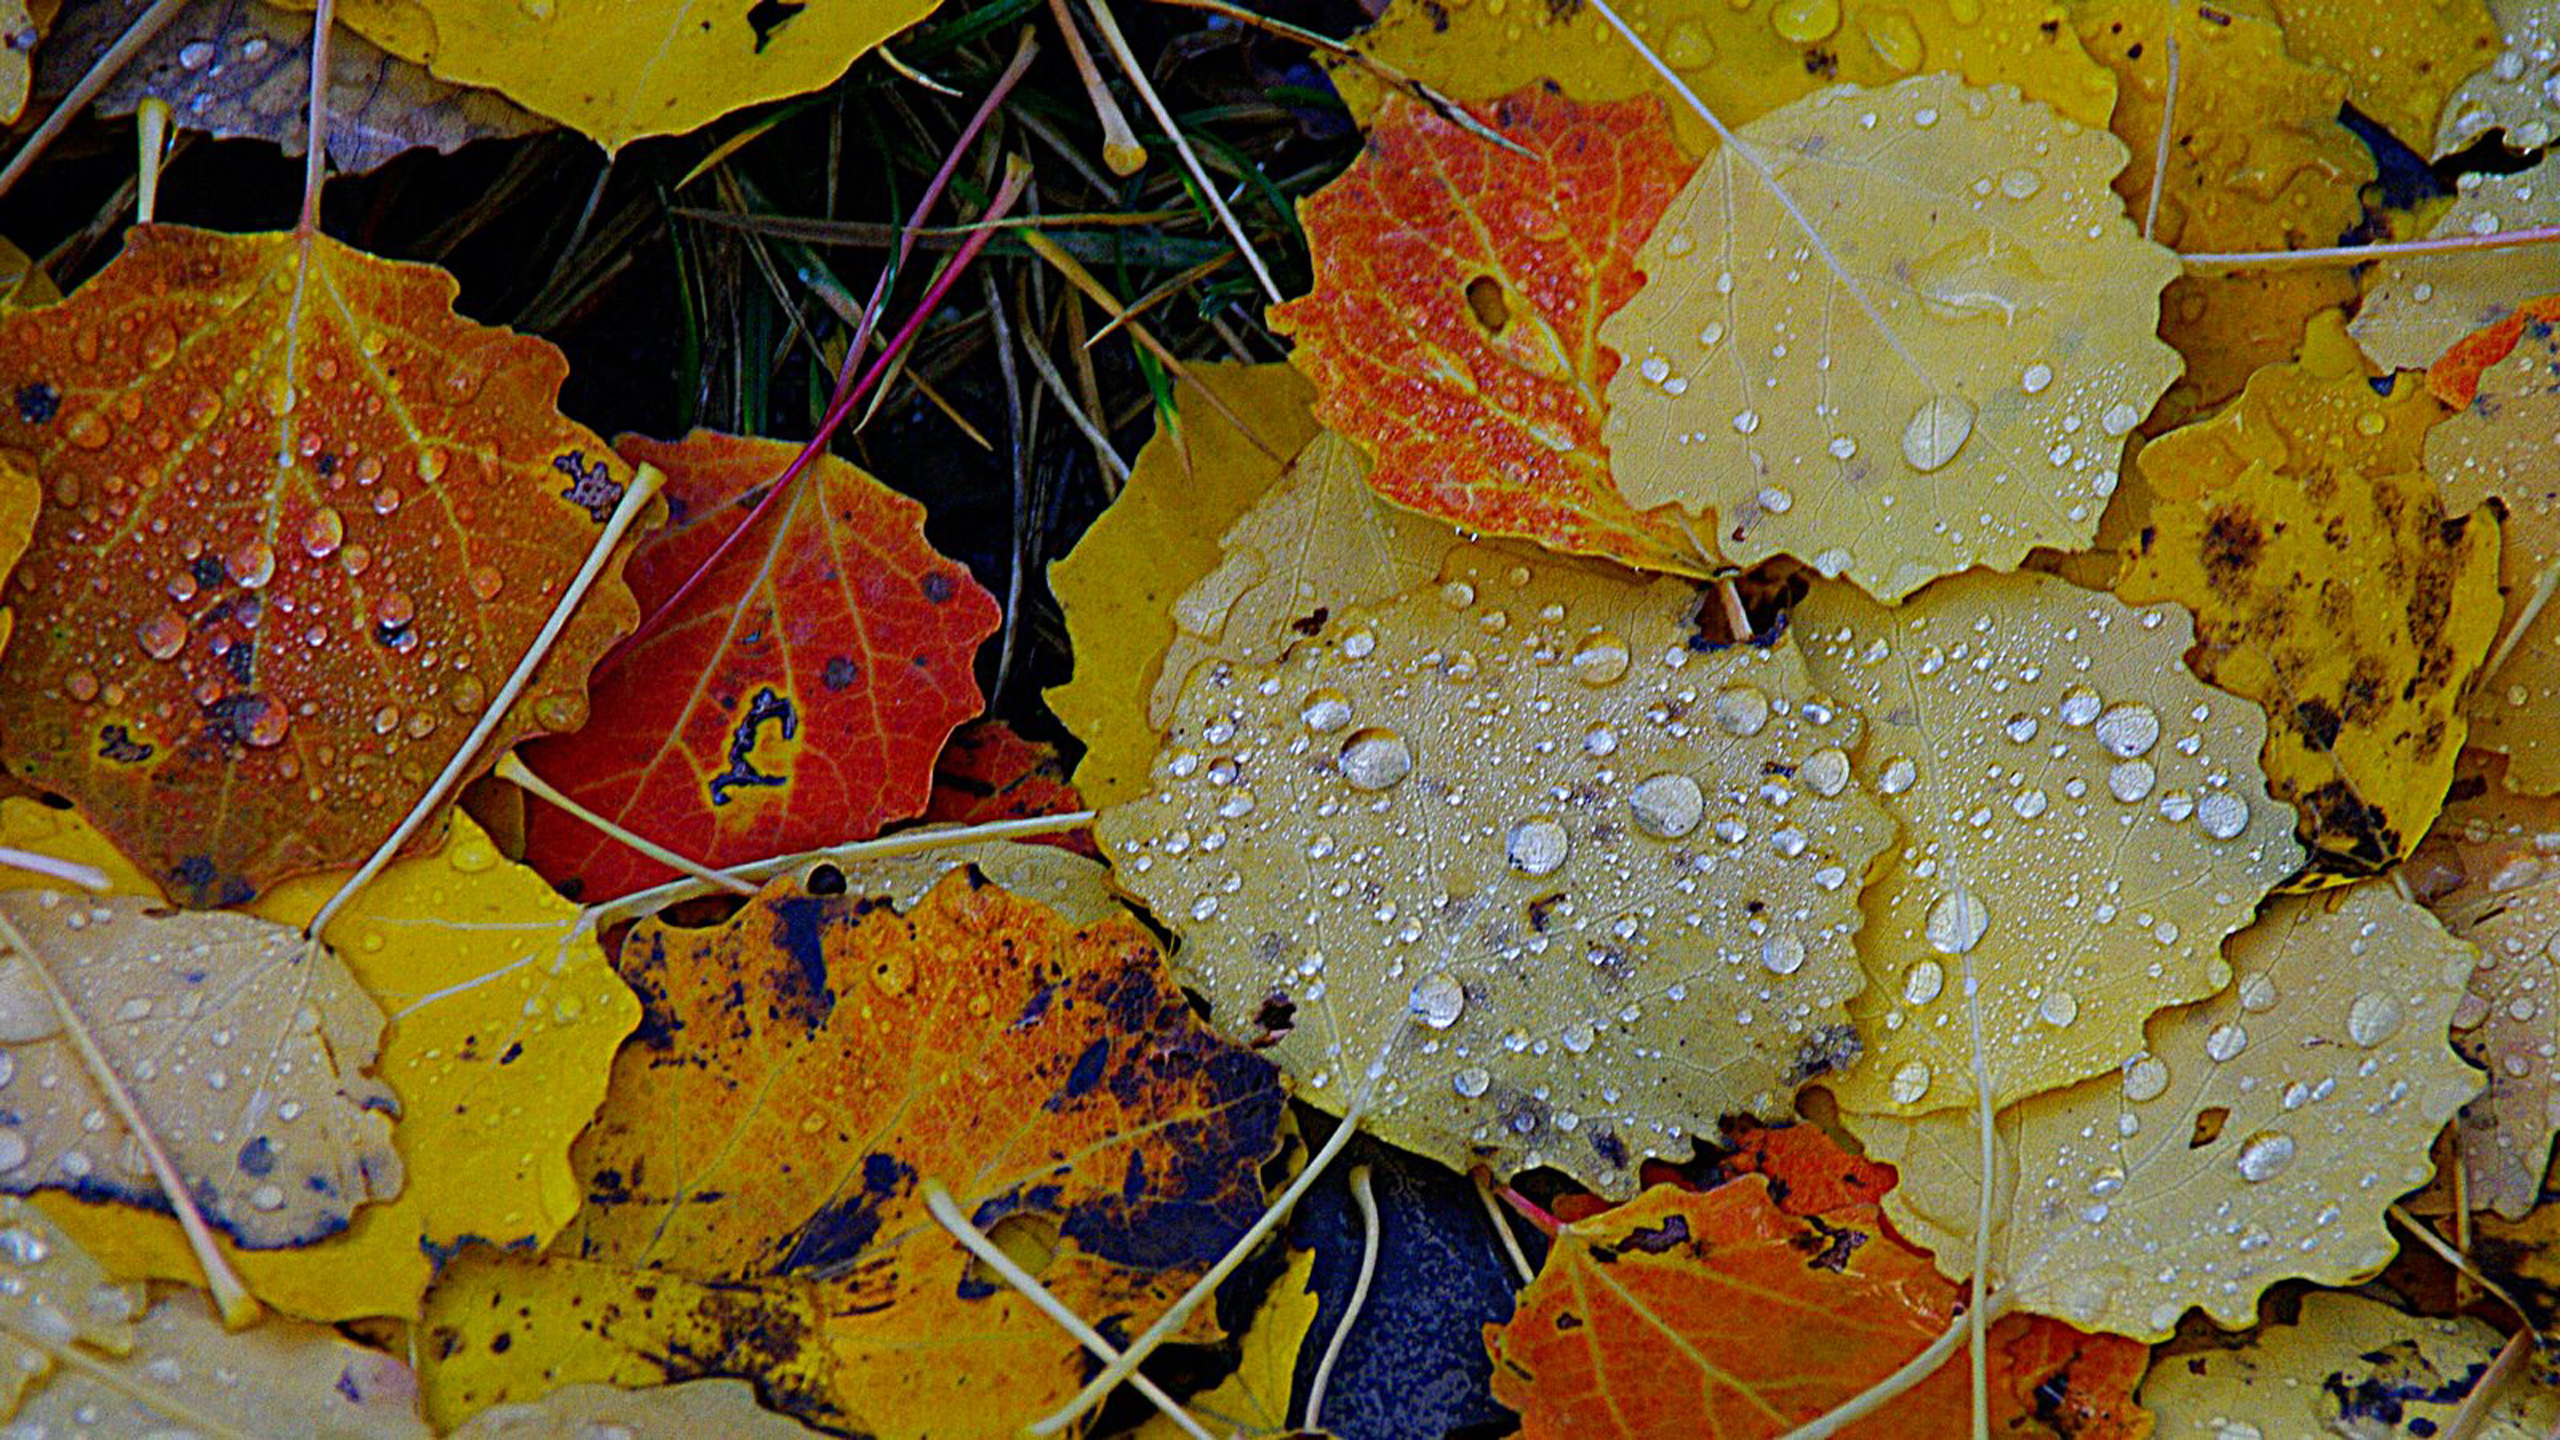 Autumn Rain Yellow Leaves Background Hd 9472 : Wallpapers13.com